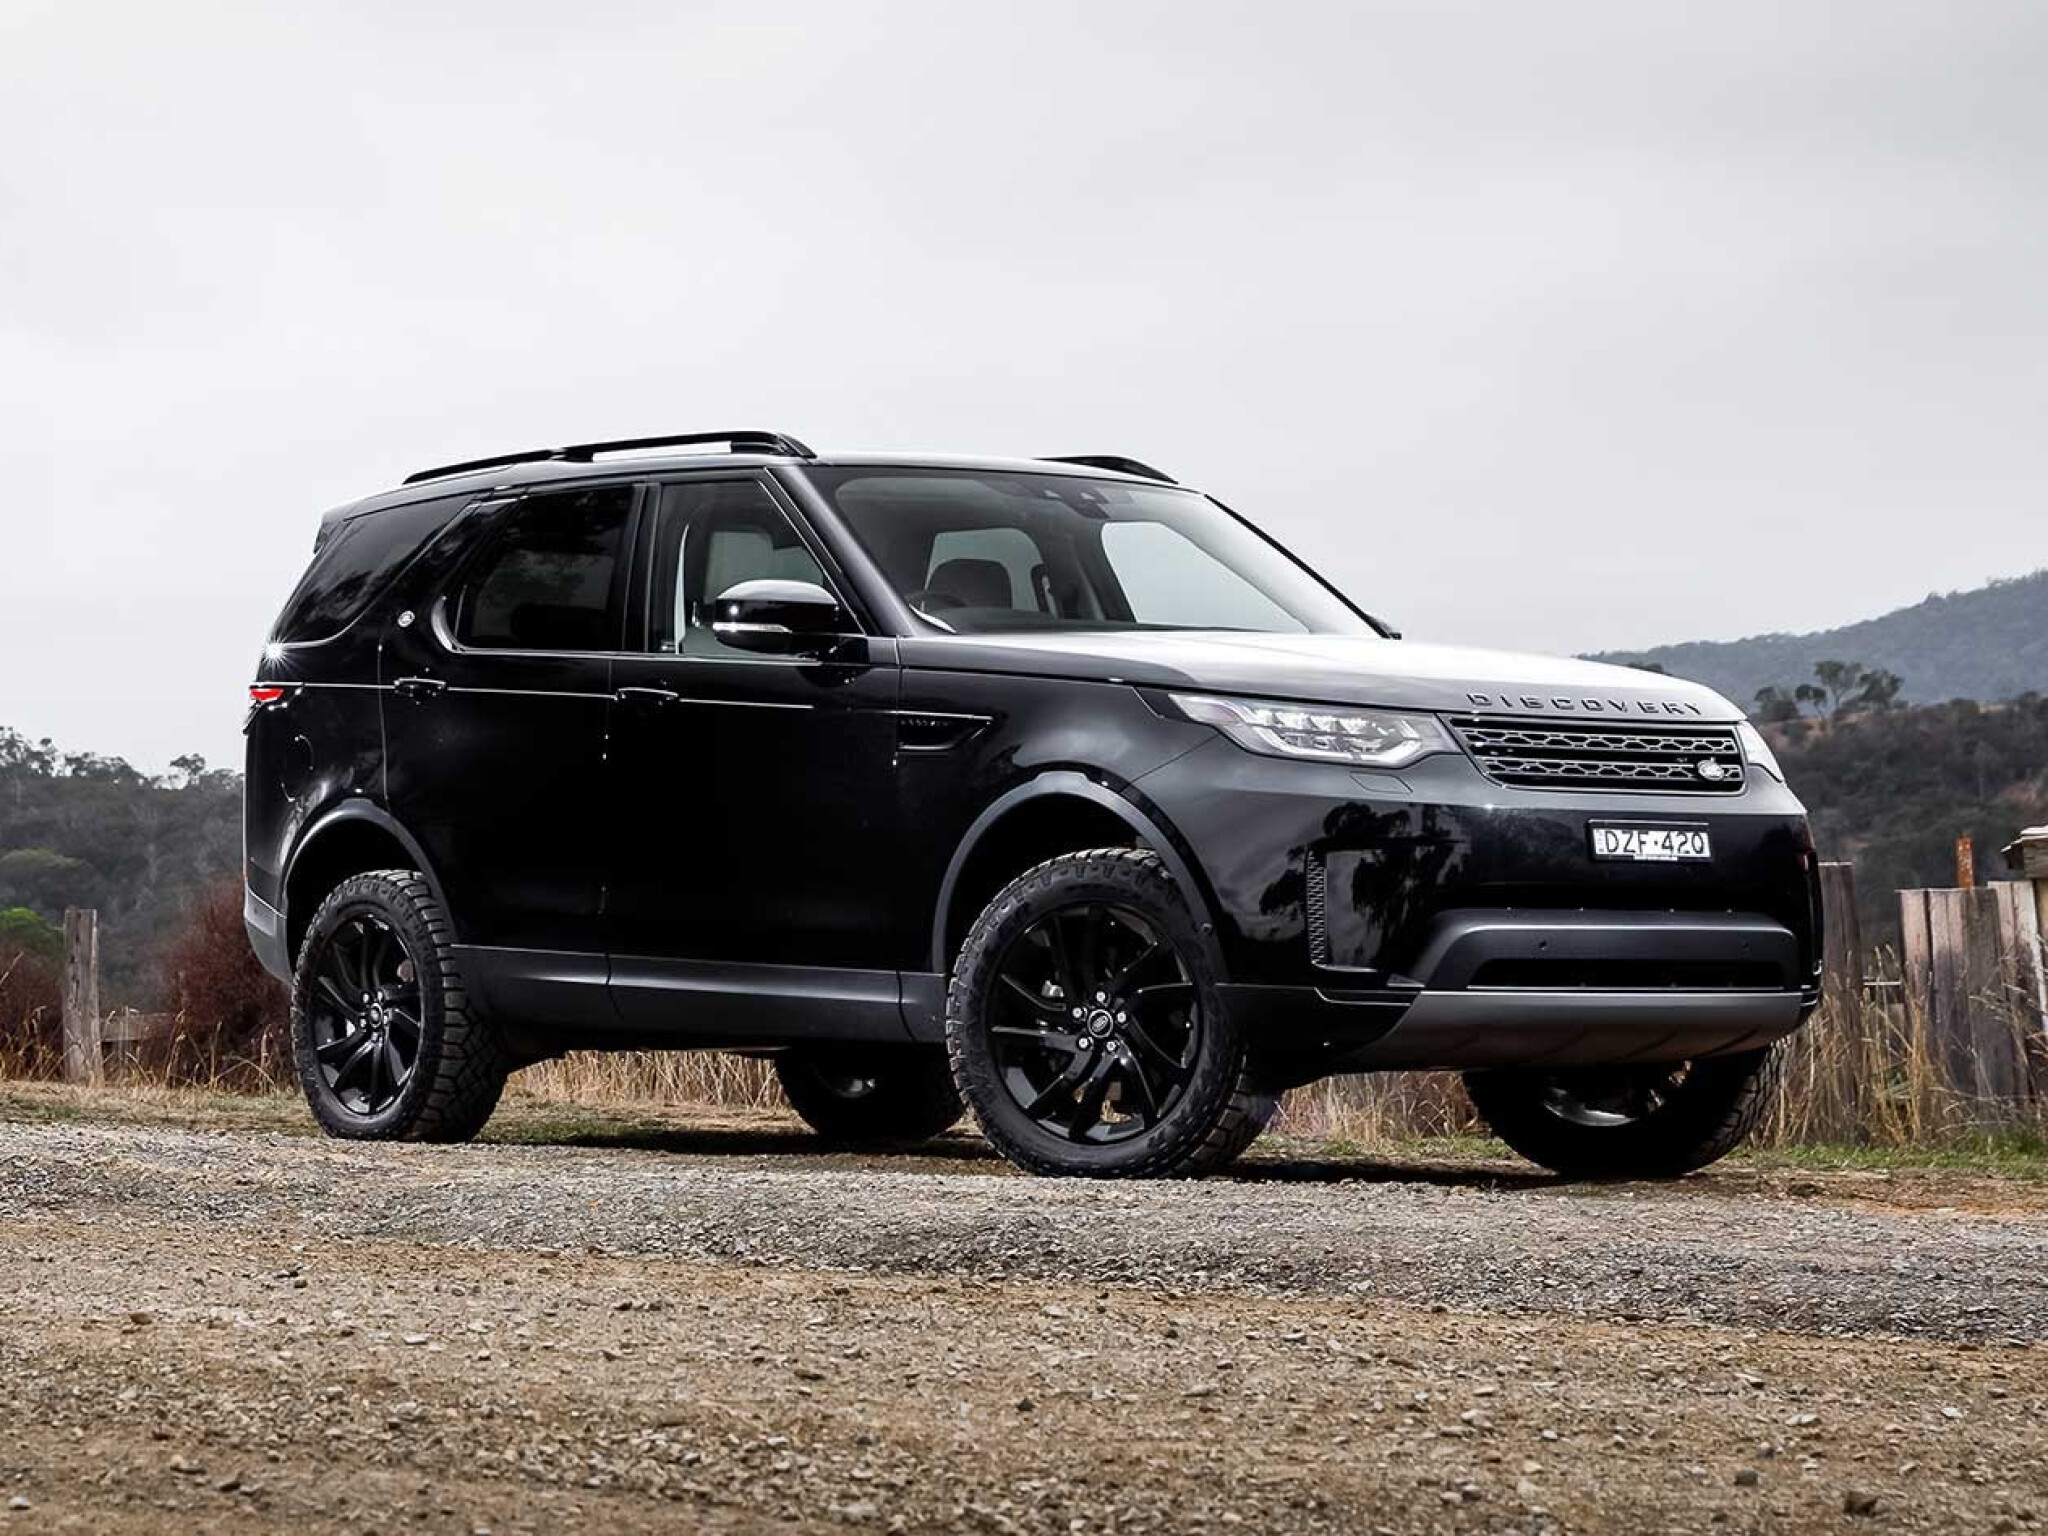 2019 Land Rover Discovery SD4 long-term review